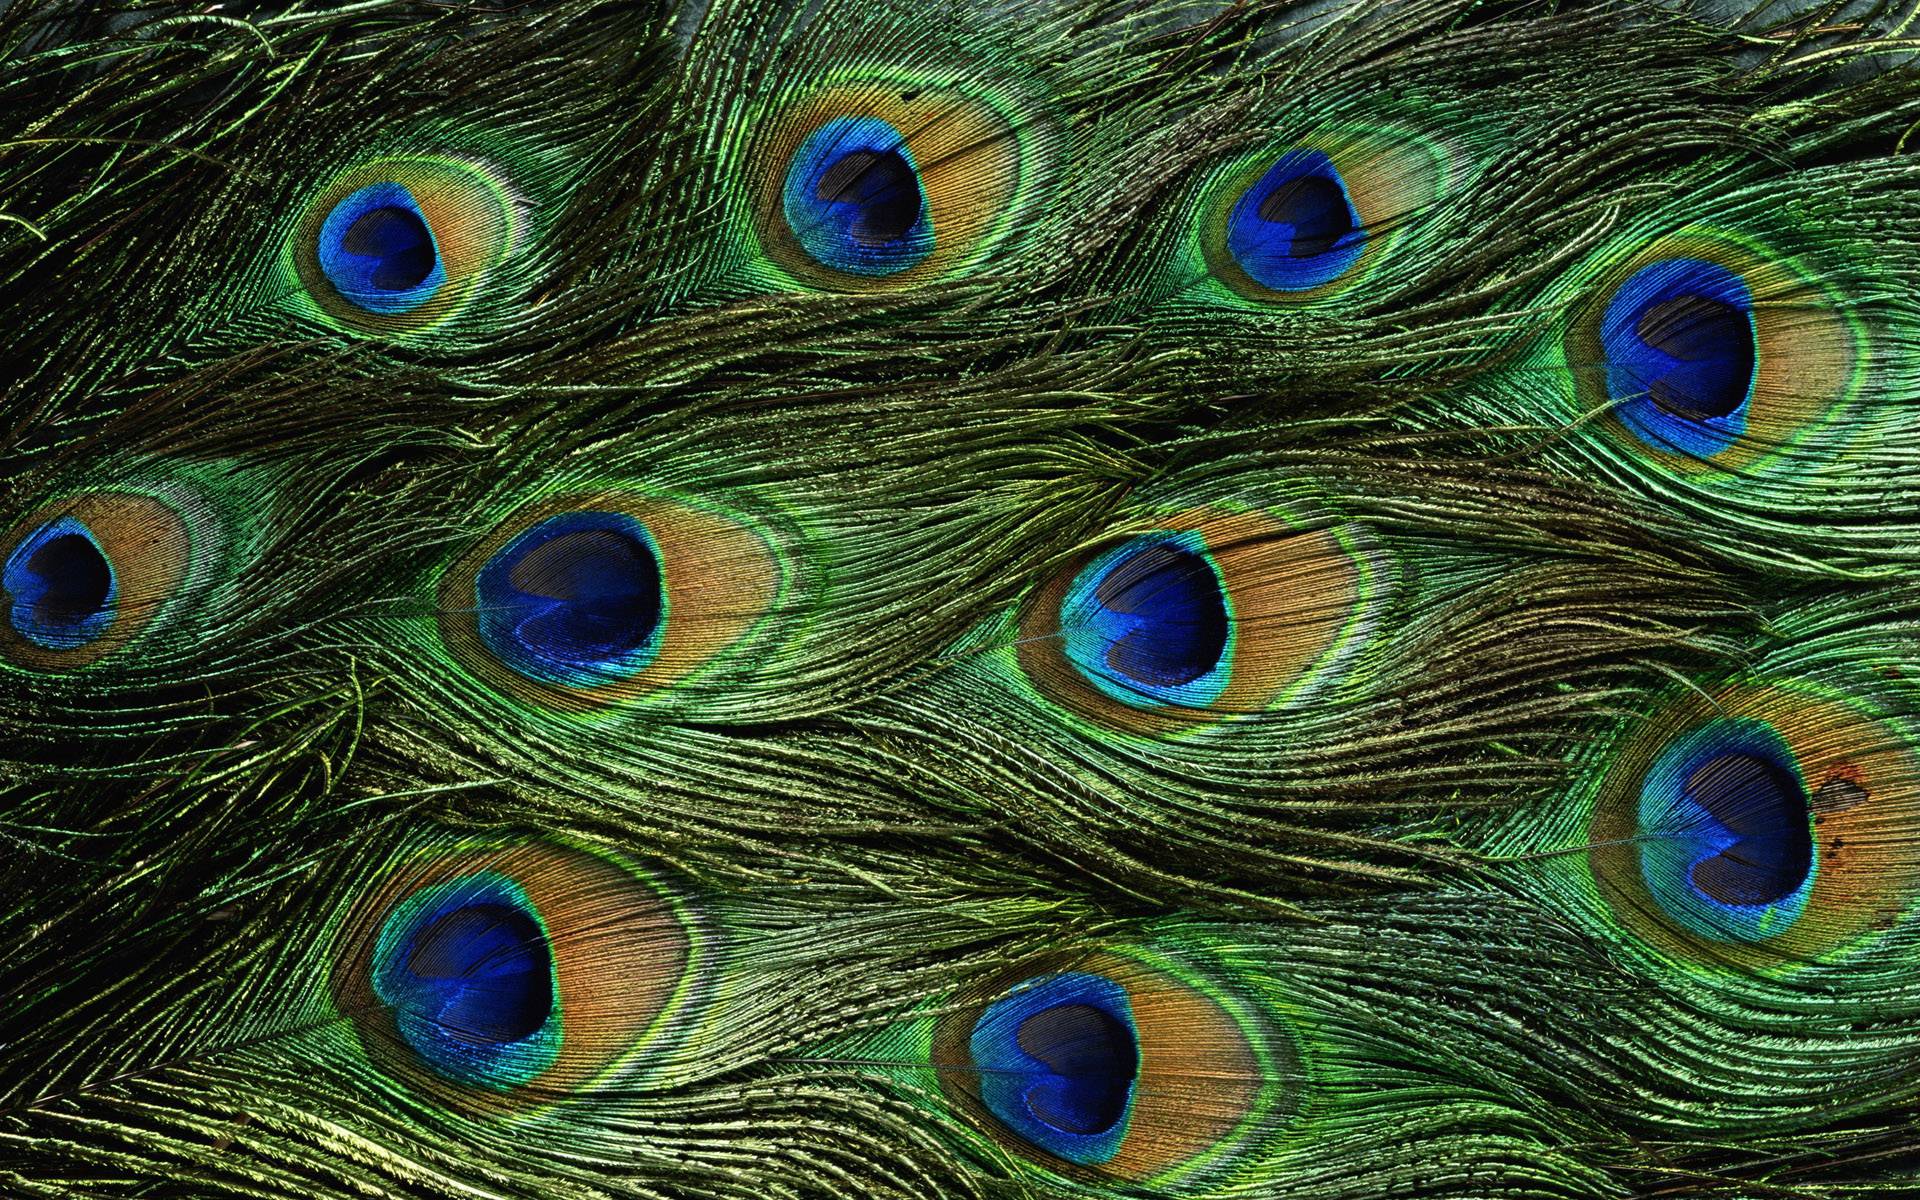 Wallpapers Of Peacock Feathers HD 2015